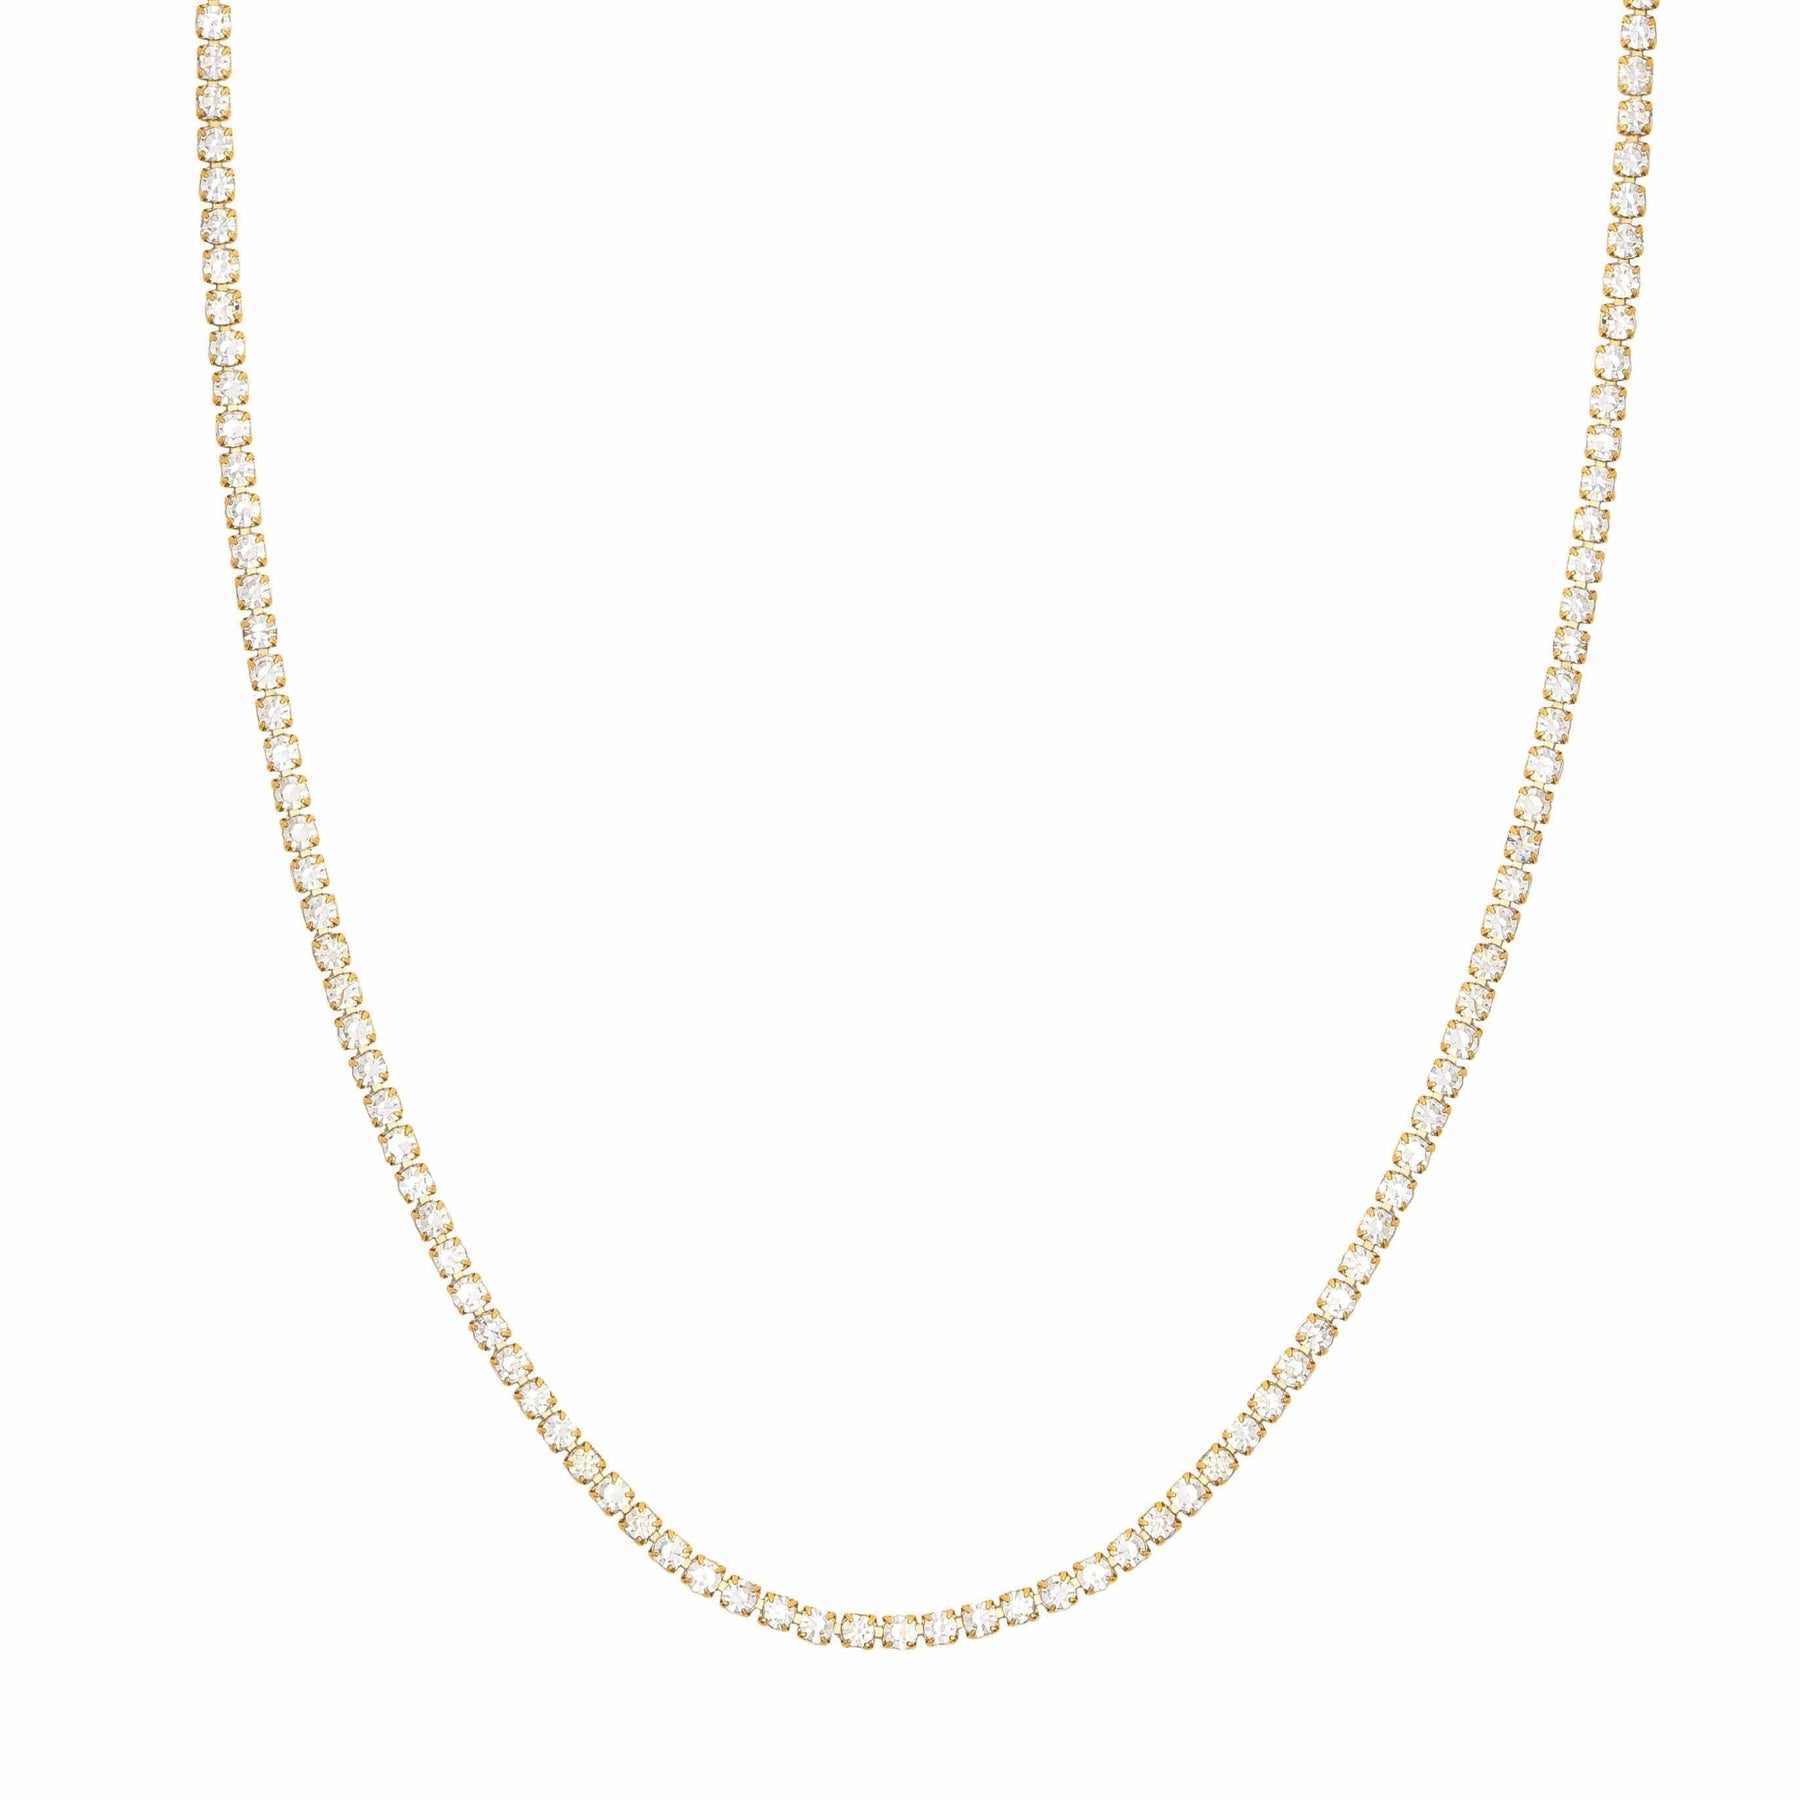 BohoMoon Stainless Steel Bardot Tennis Necklace Gold